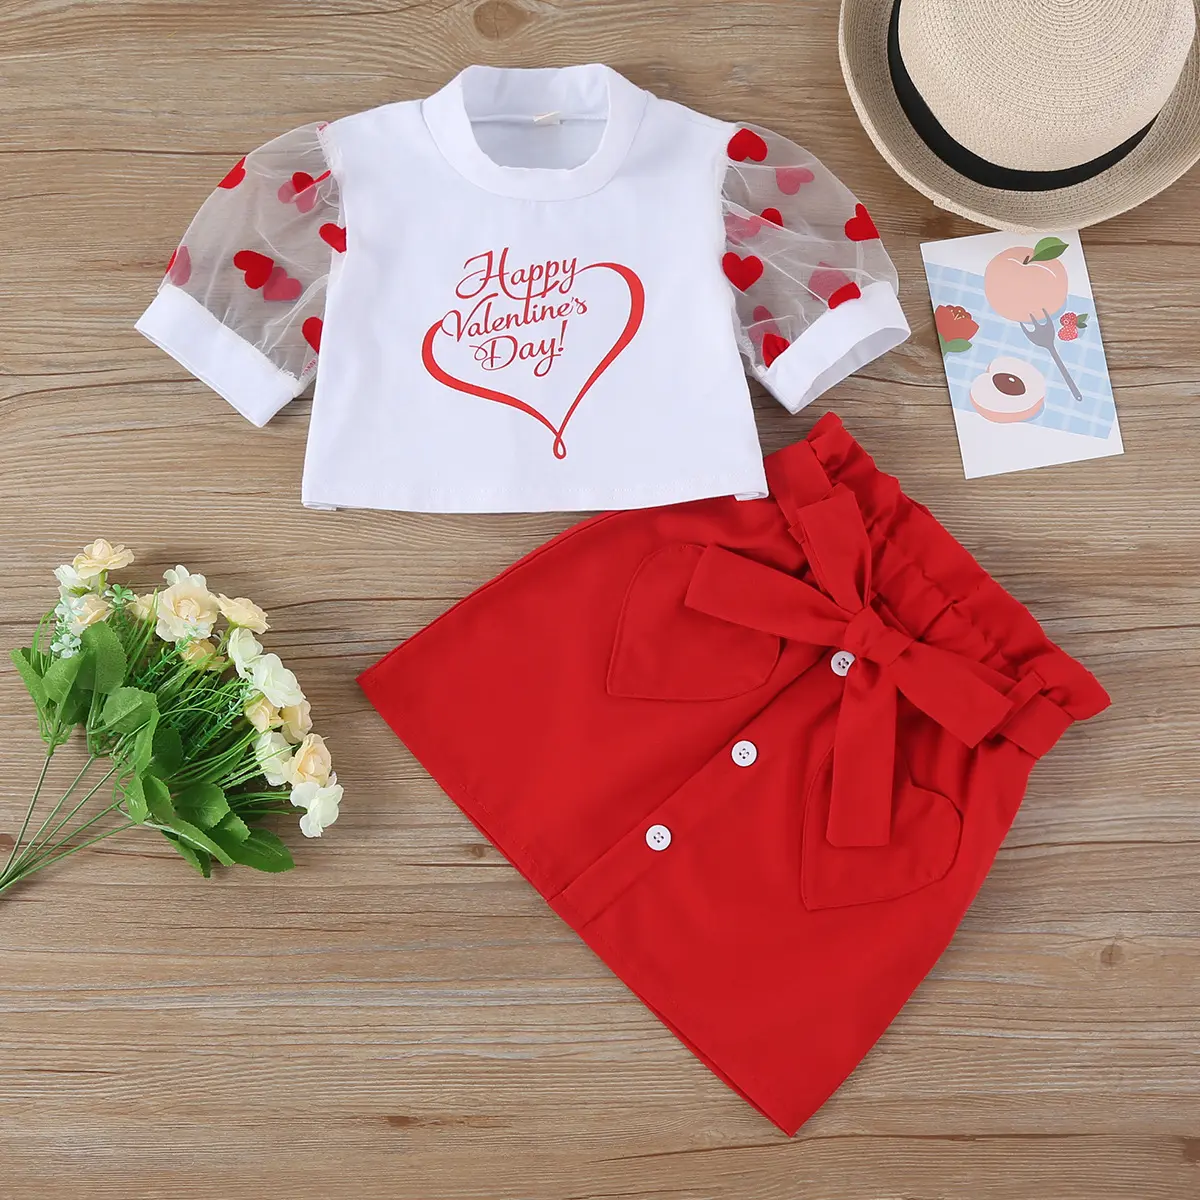 Valentine's Day boutique Wholesale Heart Printed Girl Dresses sets Kids spring Clothes Toddler Girls White tops and skirt 2pcs